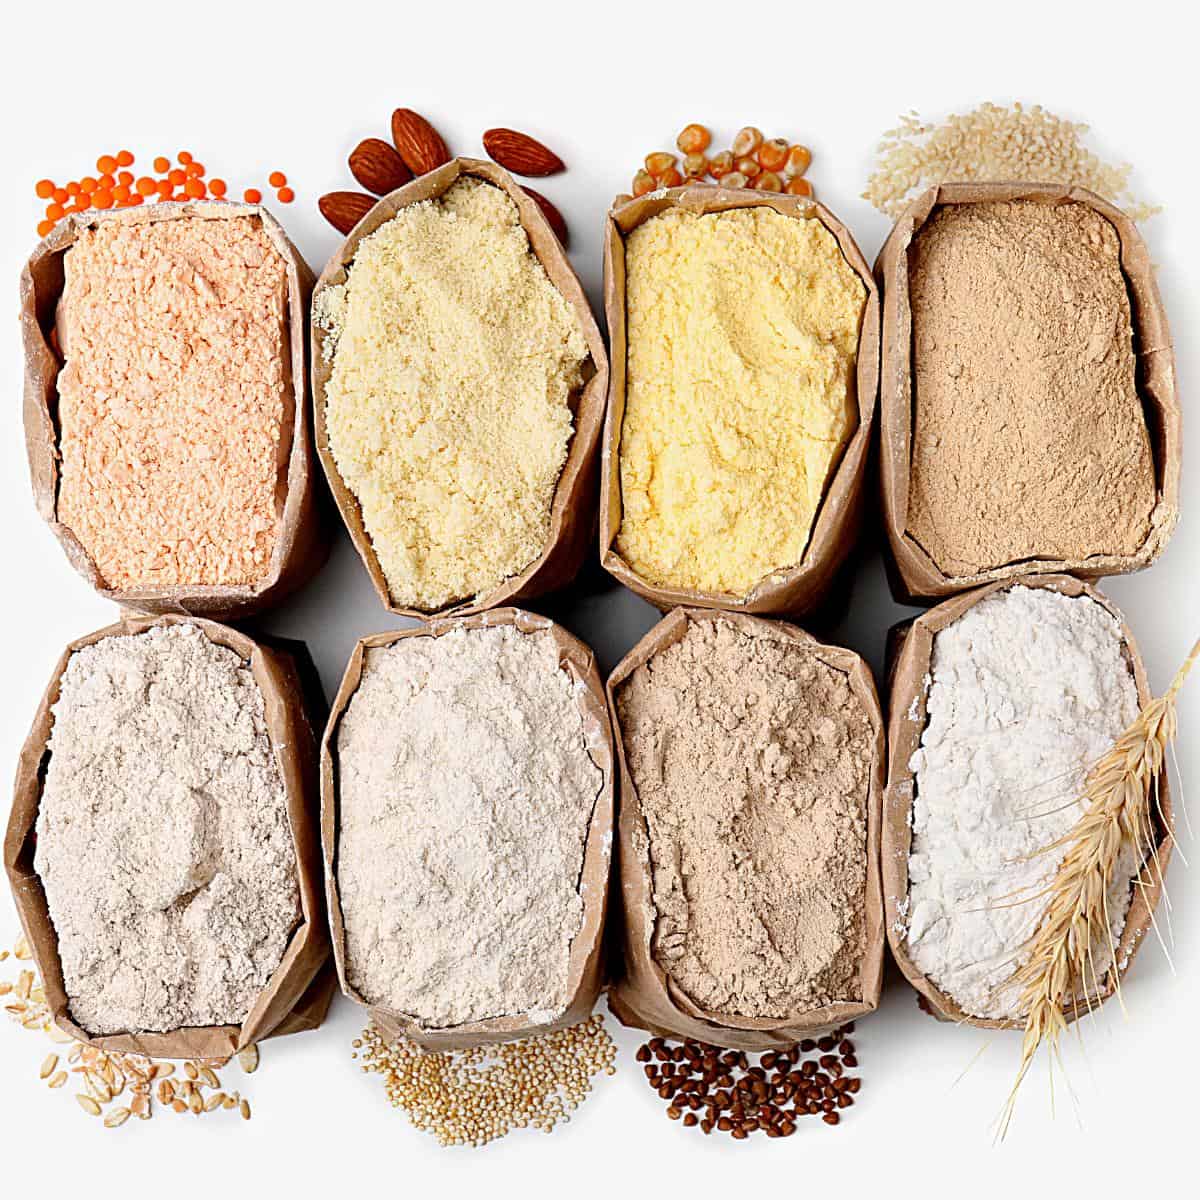 Sacks of different types of healthy flours.